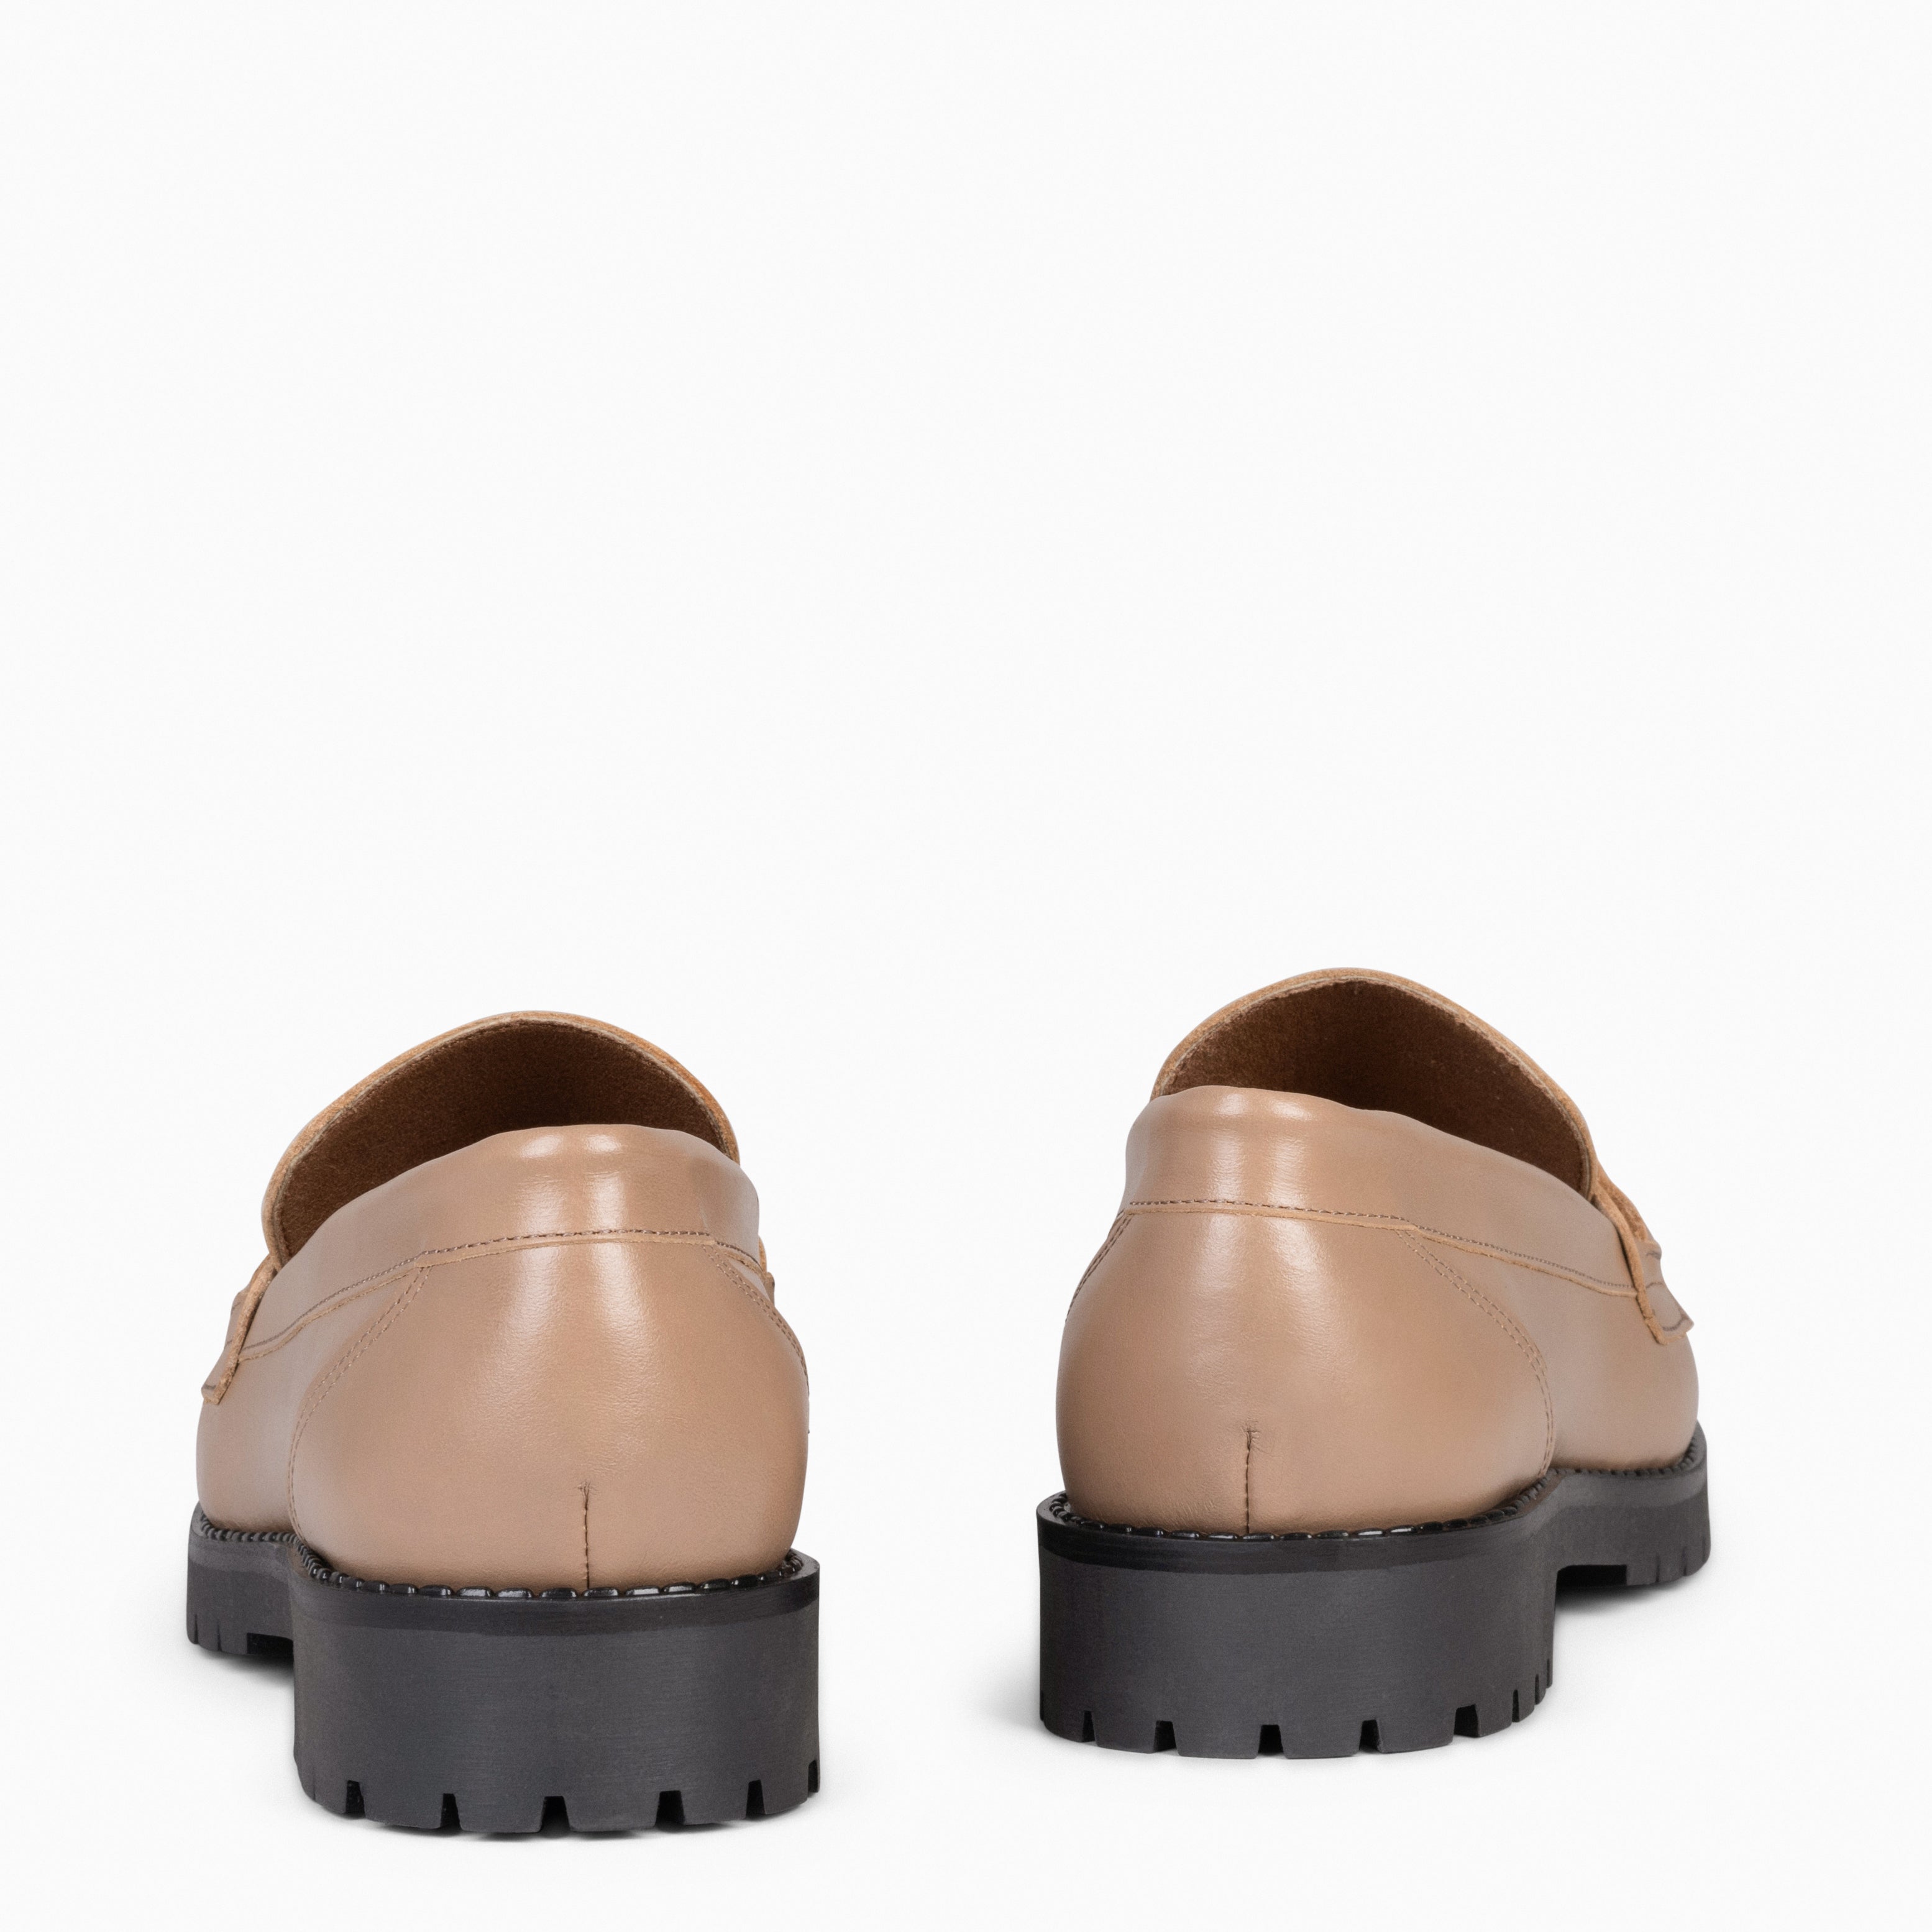 TREVILLA – TAUPE Casual women moccasins 